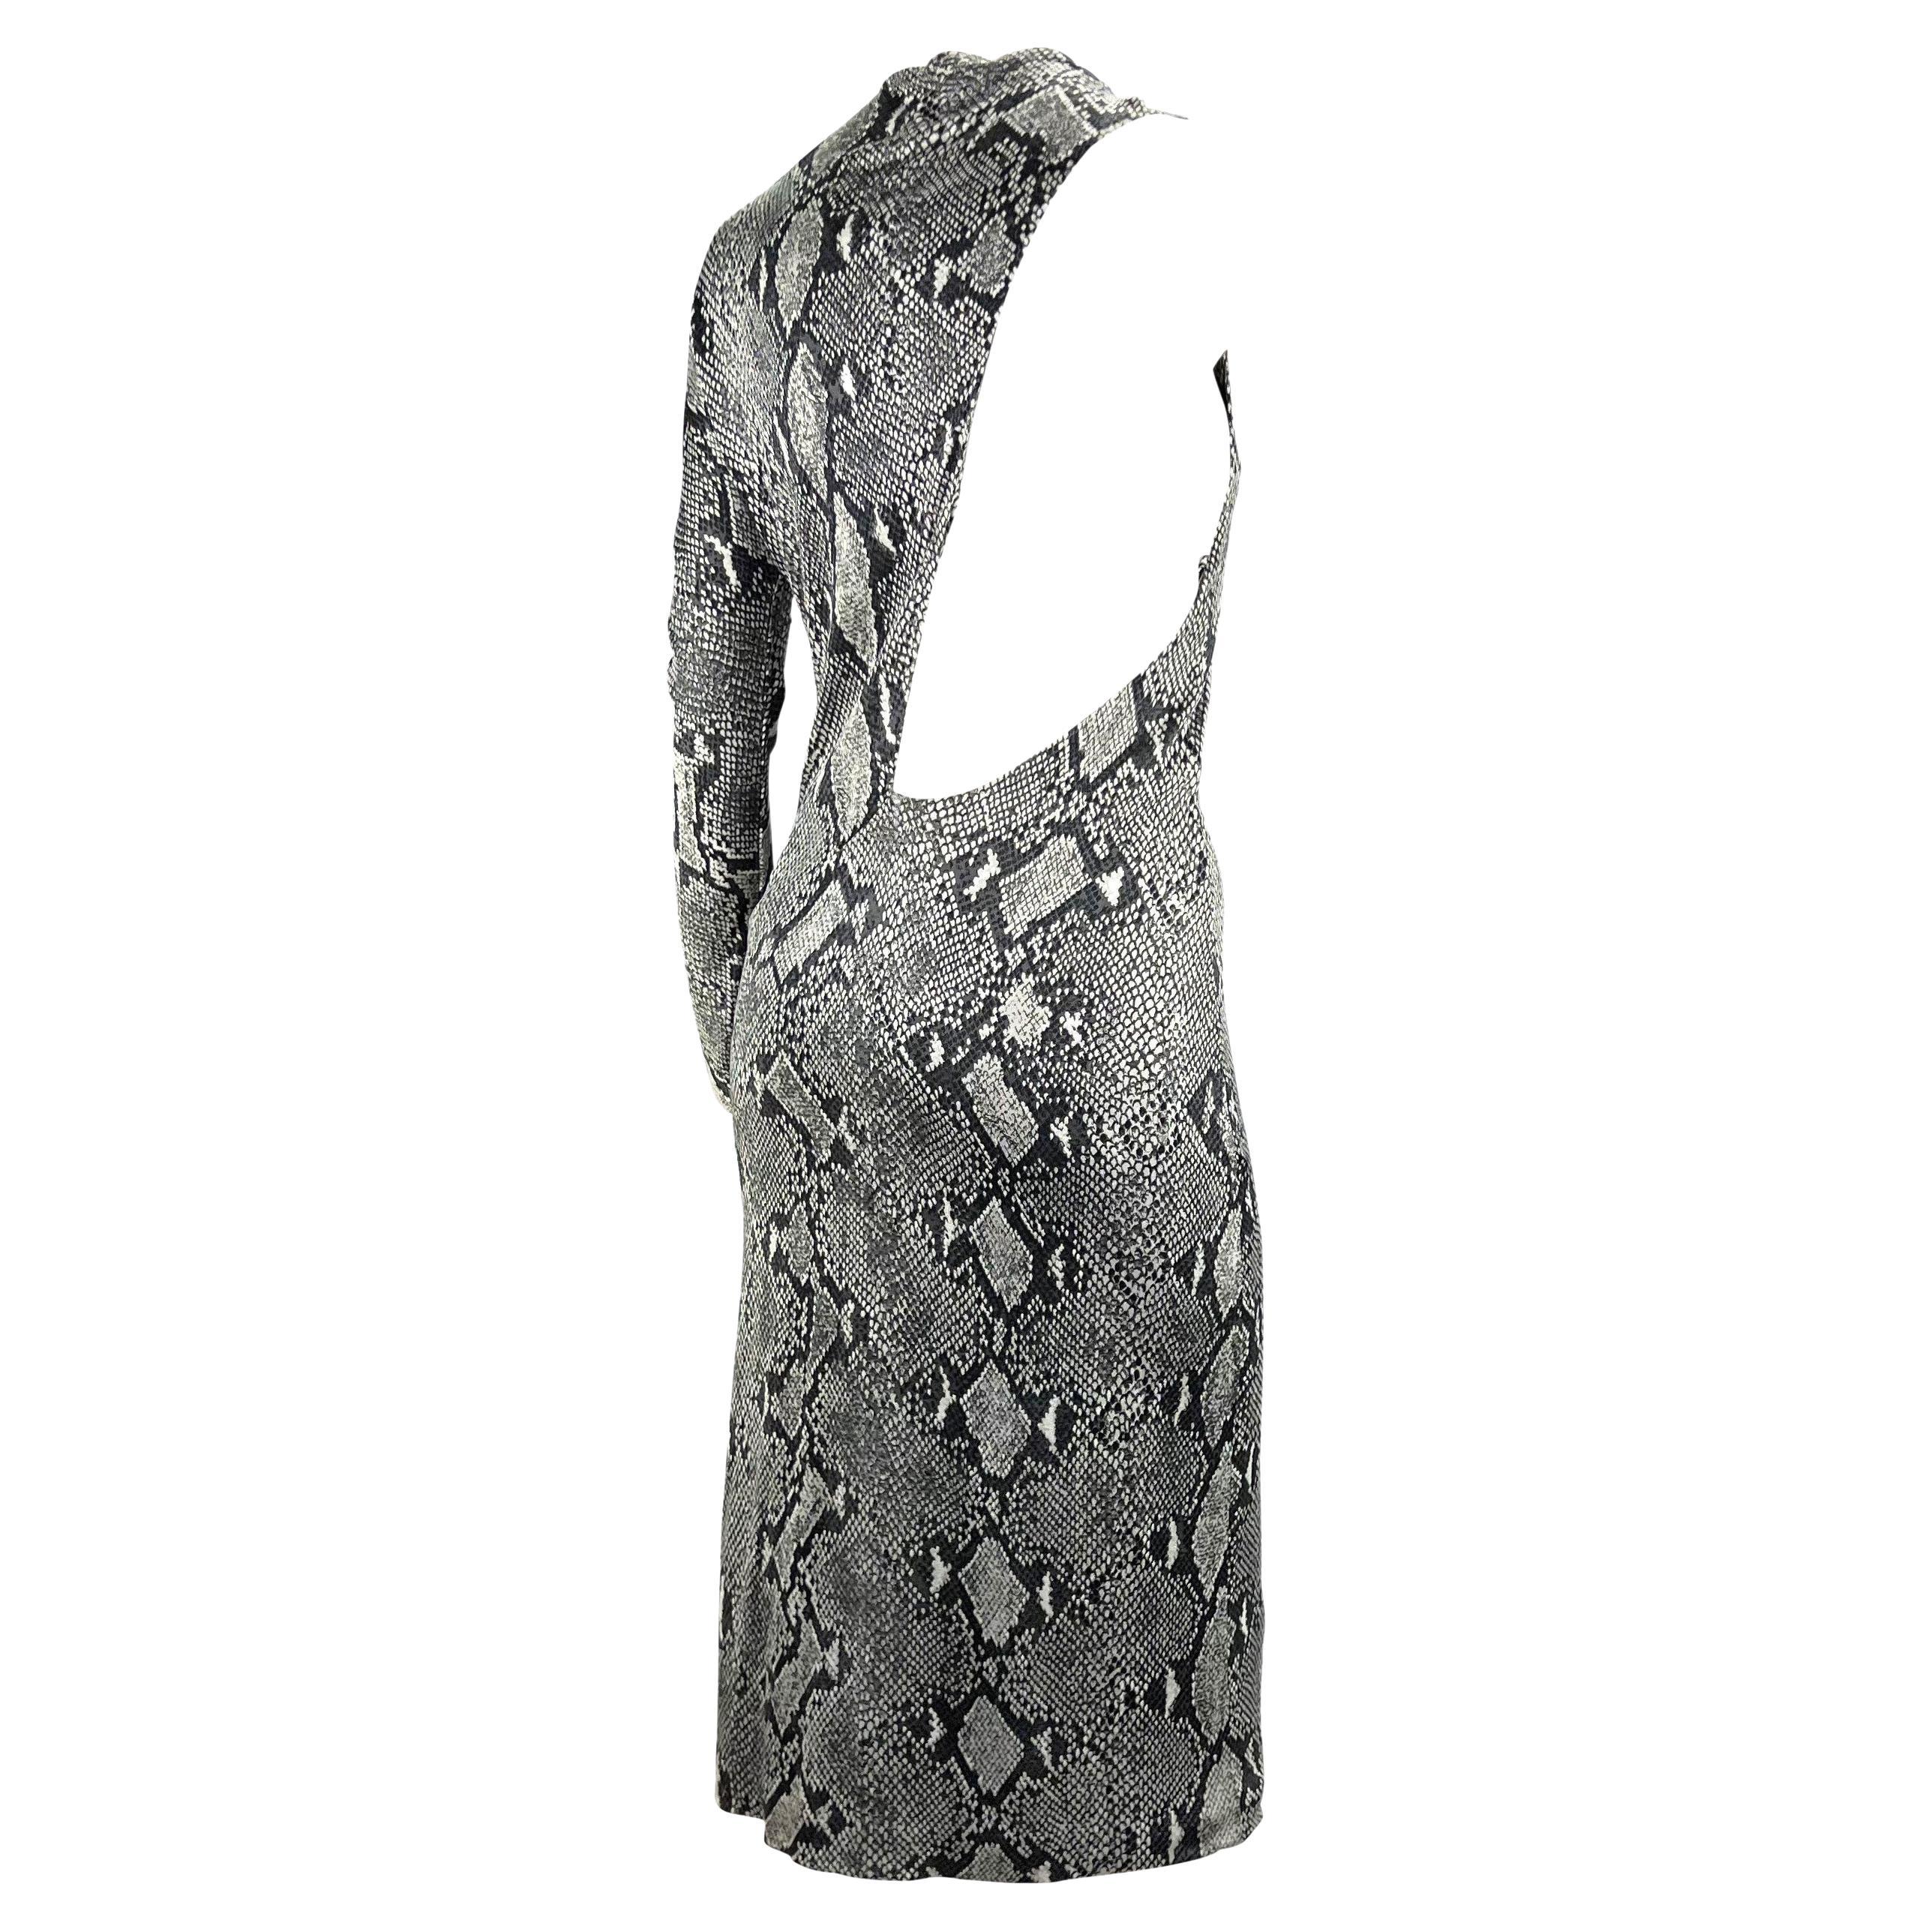 S/S 2000 Gucci by Tom Ford Grey Snake Print Asymmetric One Sleeve Dress For Sale 4